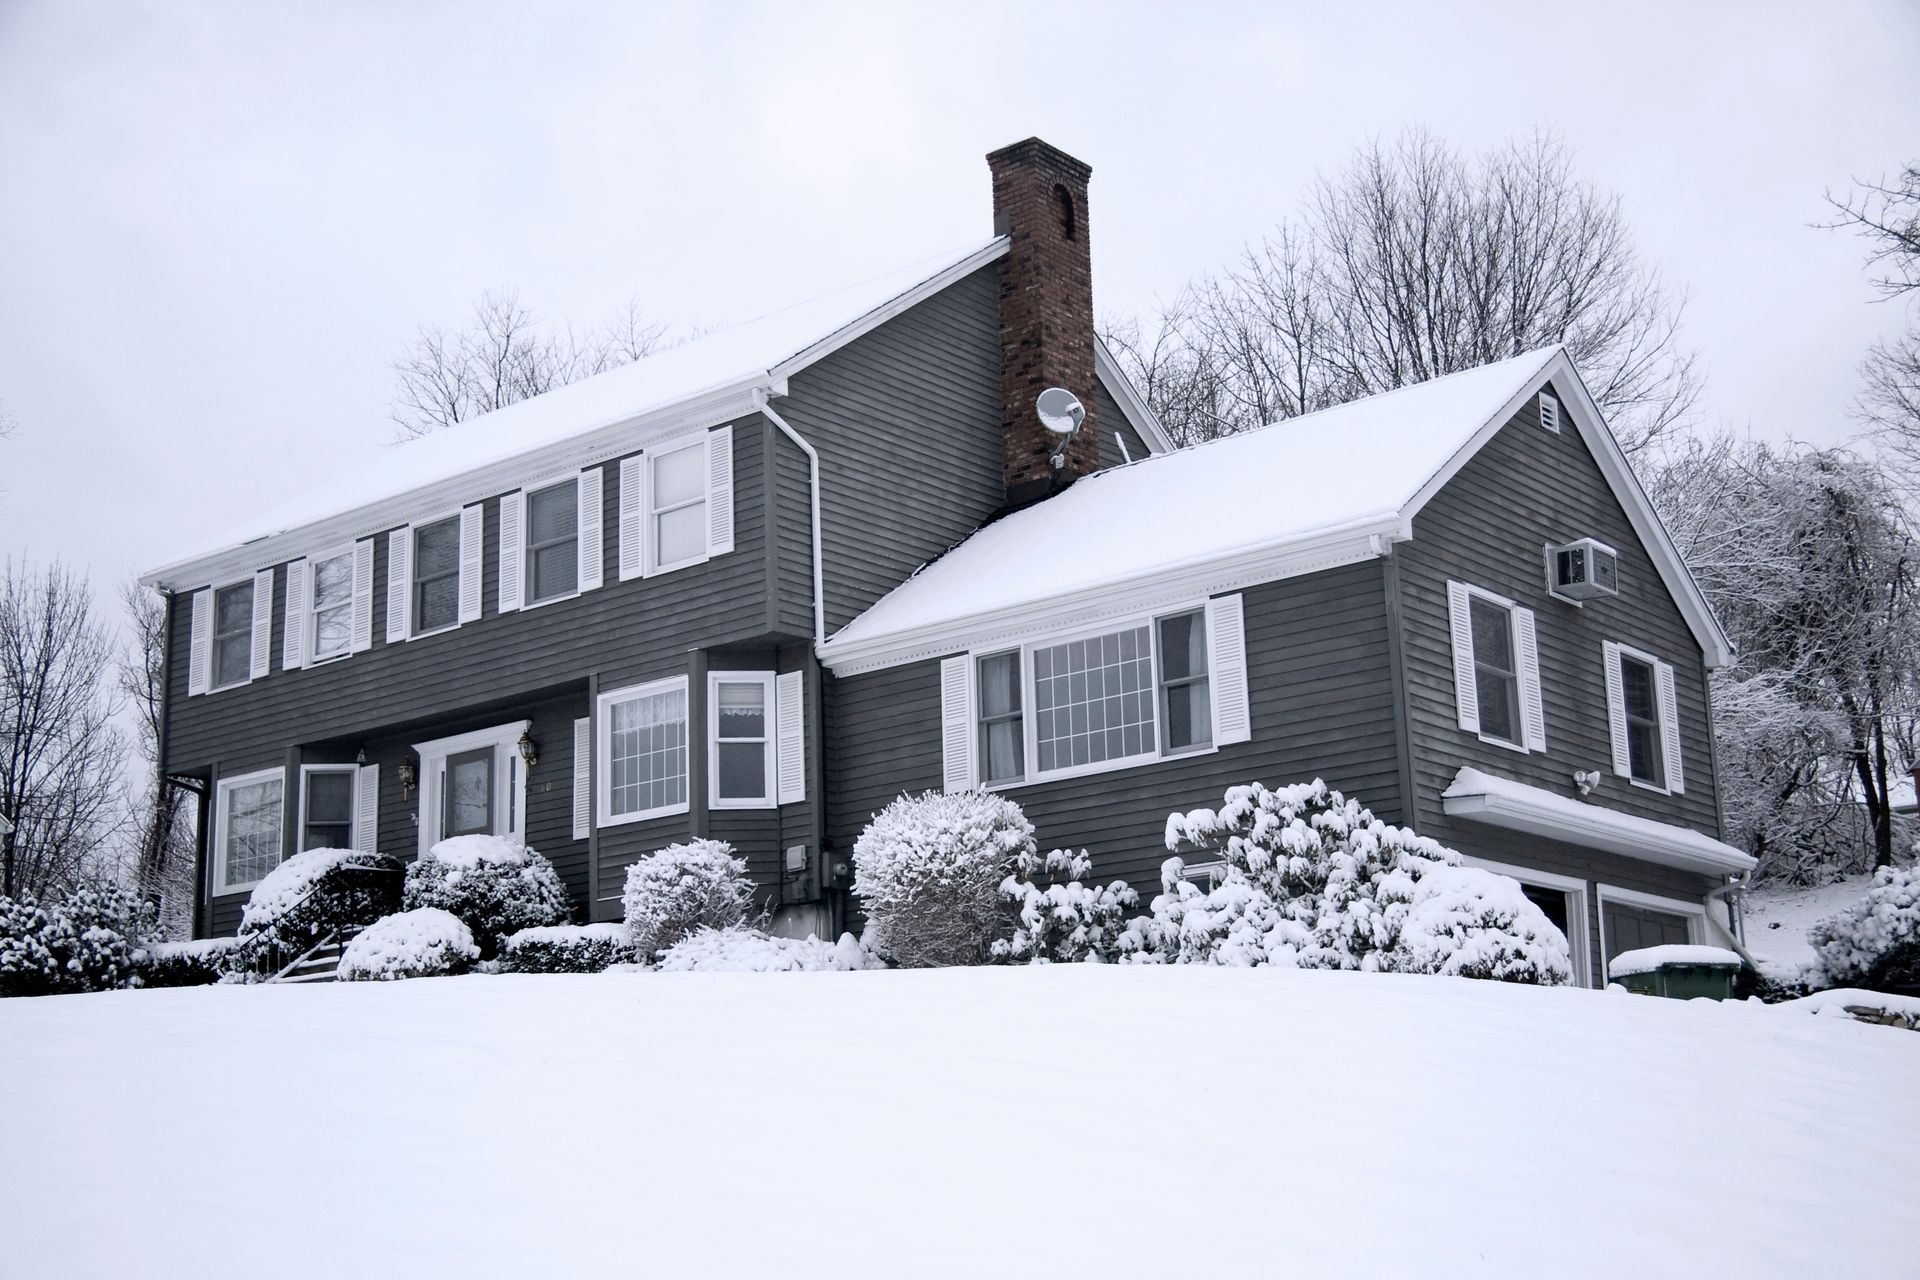 Common winter Roofing Problems and Their Solutions